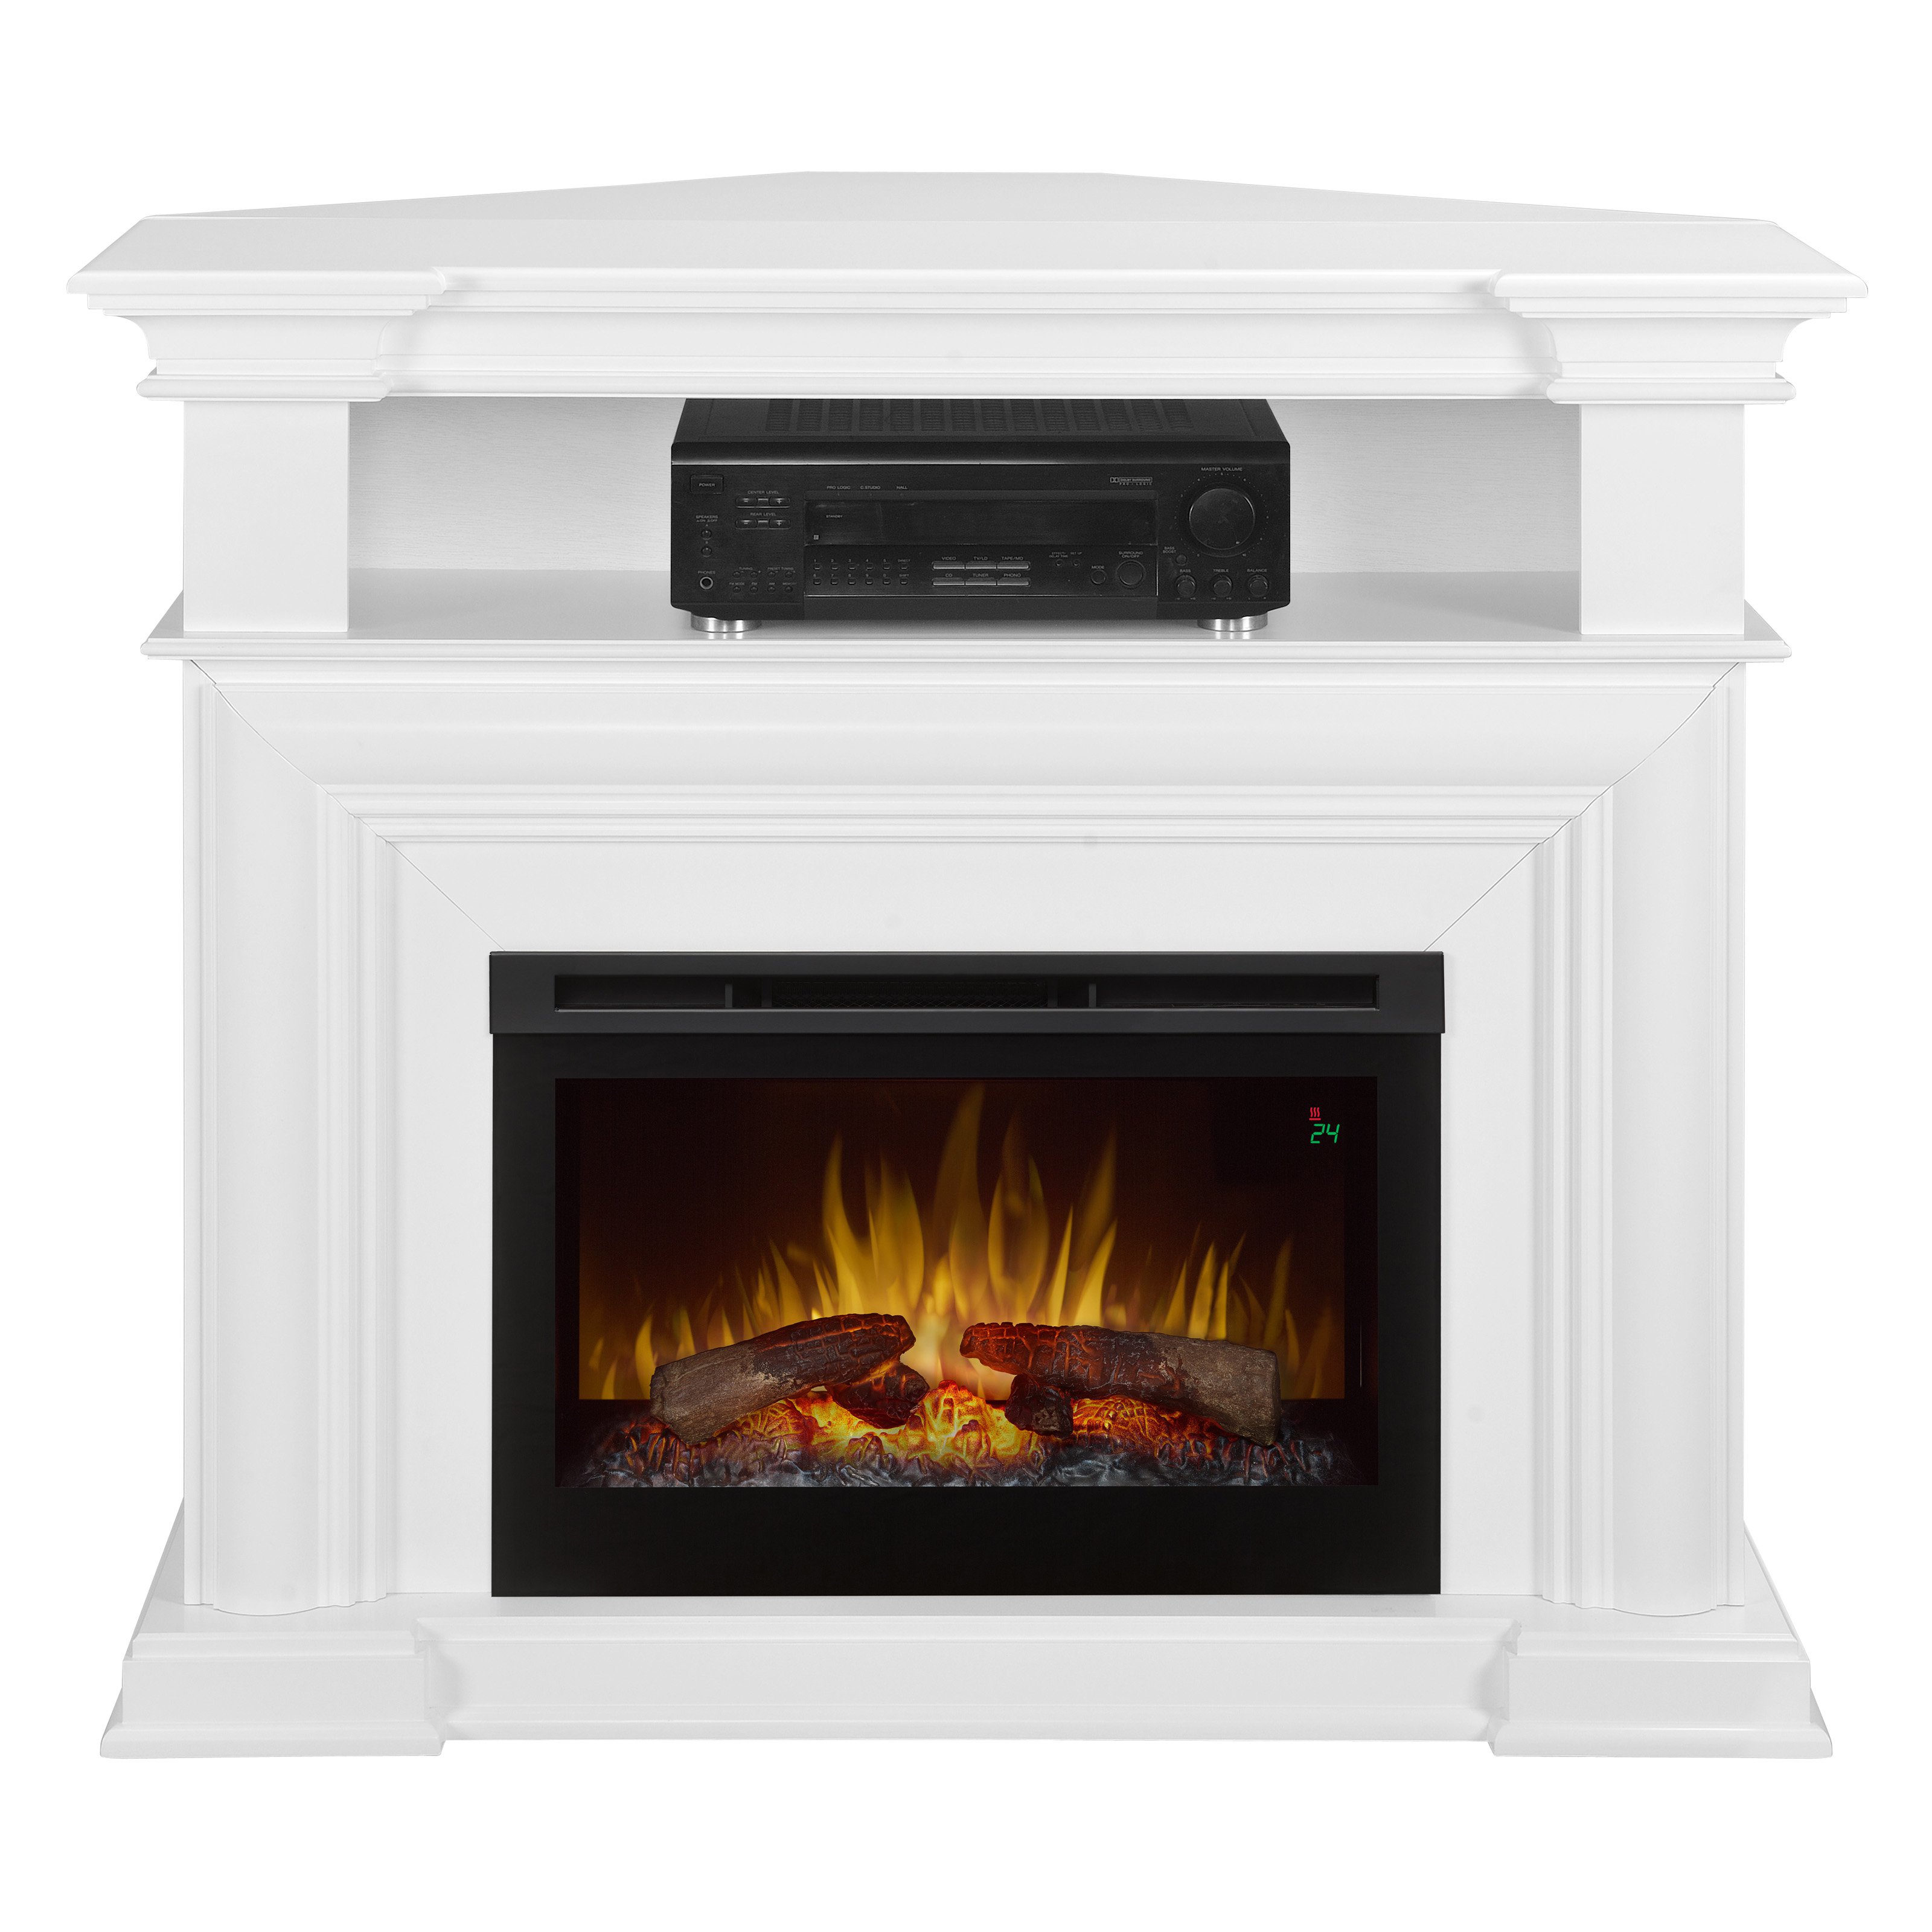 Electric Fireplace Replacement Insert Best Of Electric Fireplace with Convertible Corner Option and Drop Down Front